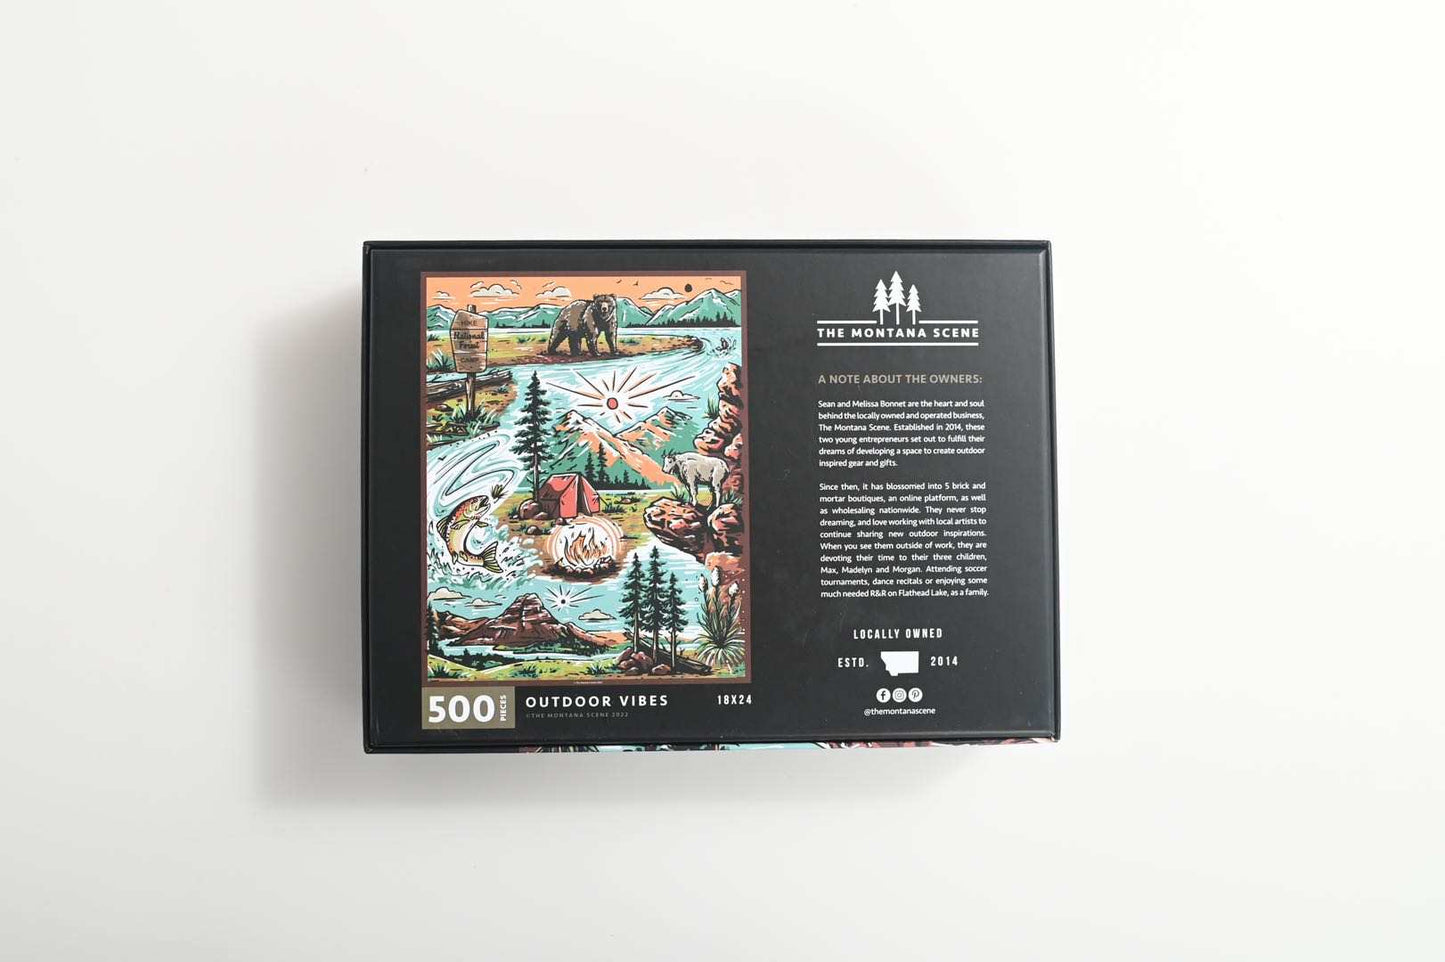 Outdoor Vibes Puzzle - 500 Pieces